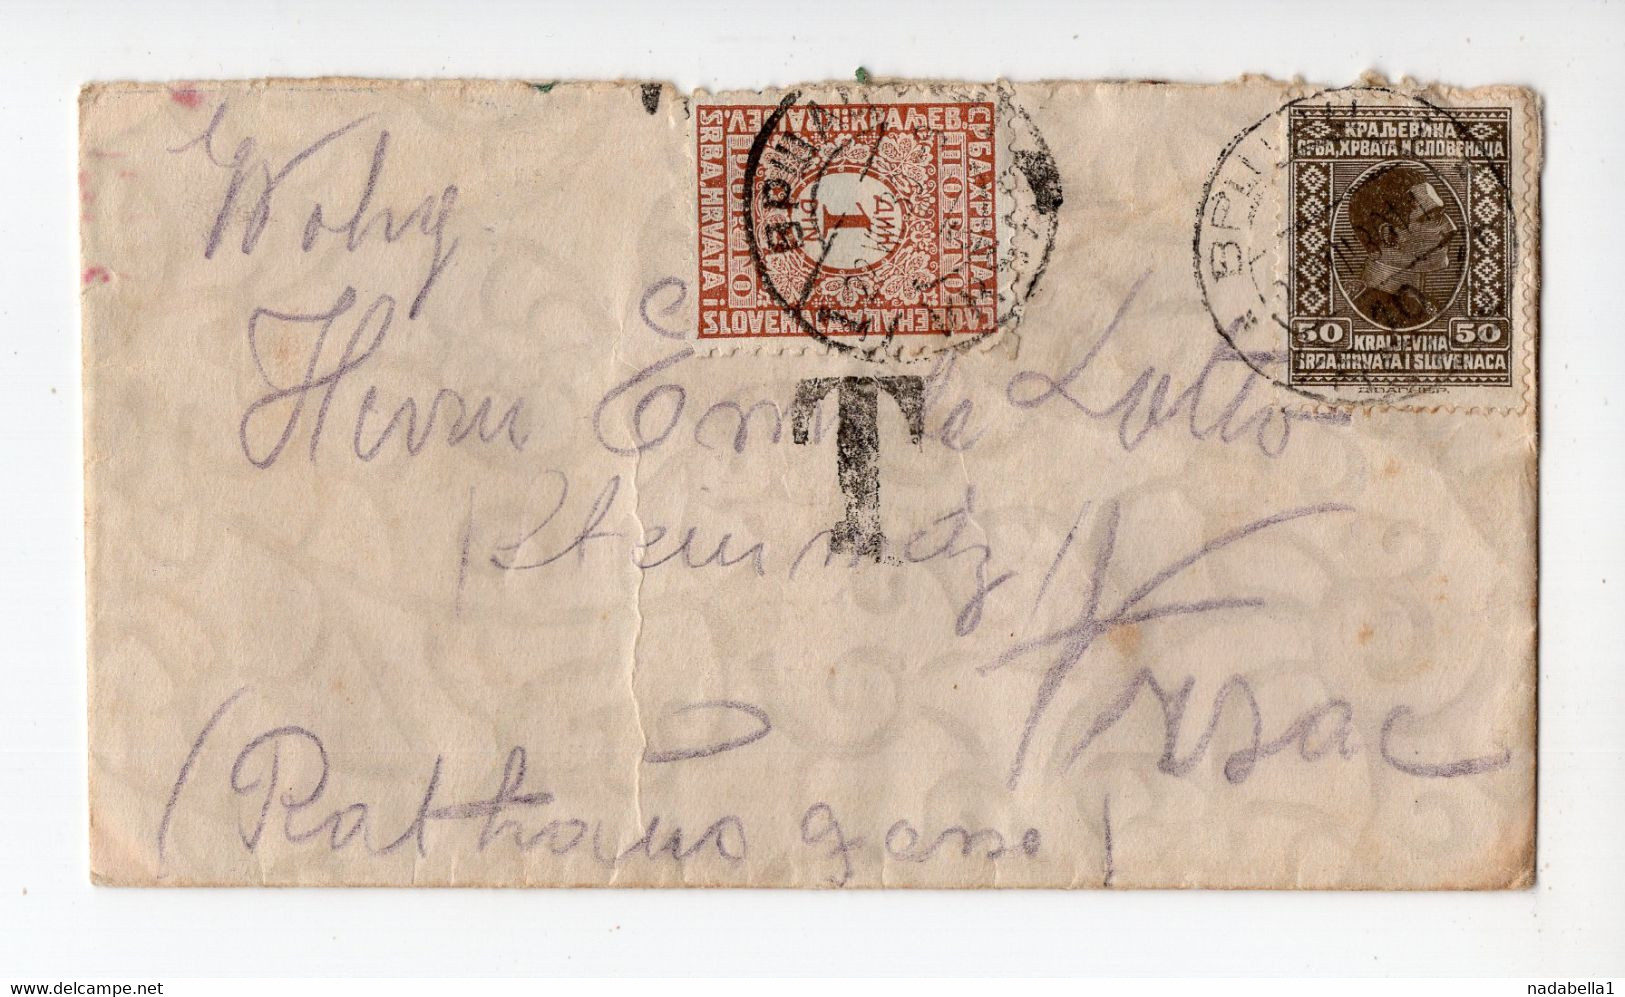 1930. KINGDOM OF YUGOSLAVIA,SERBIA,VRSAC LOCAL COVER,POSTAGE DUE 1 DIN. - Timbres-taxe